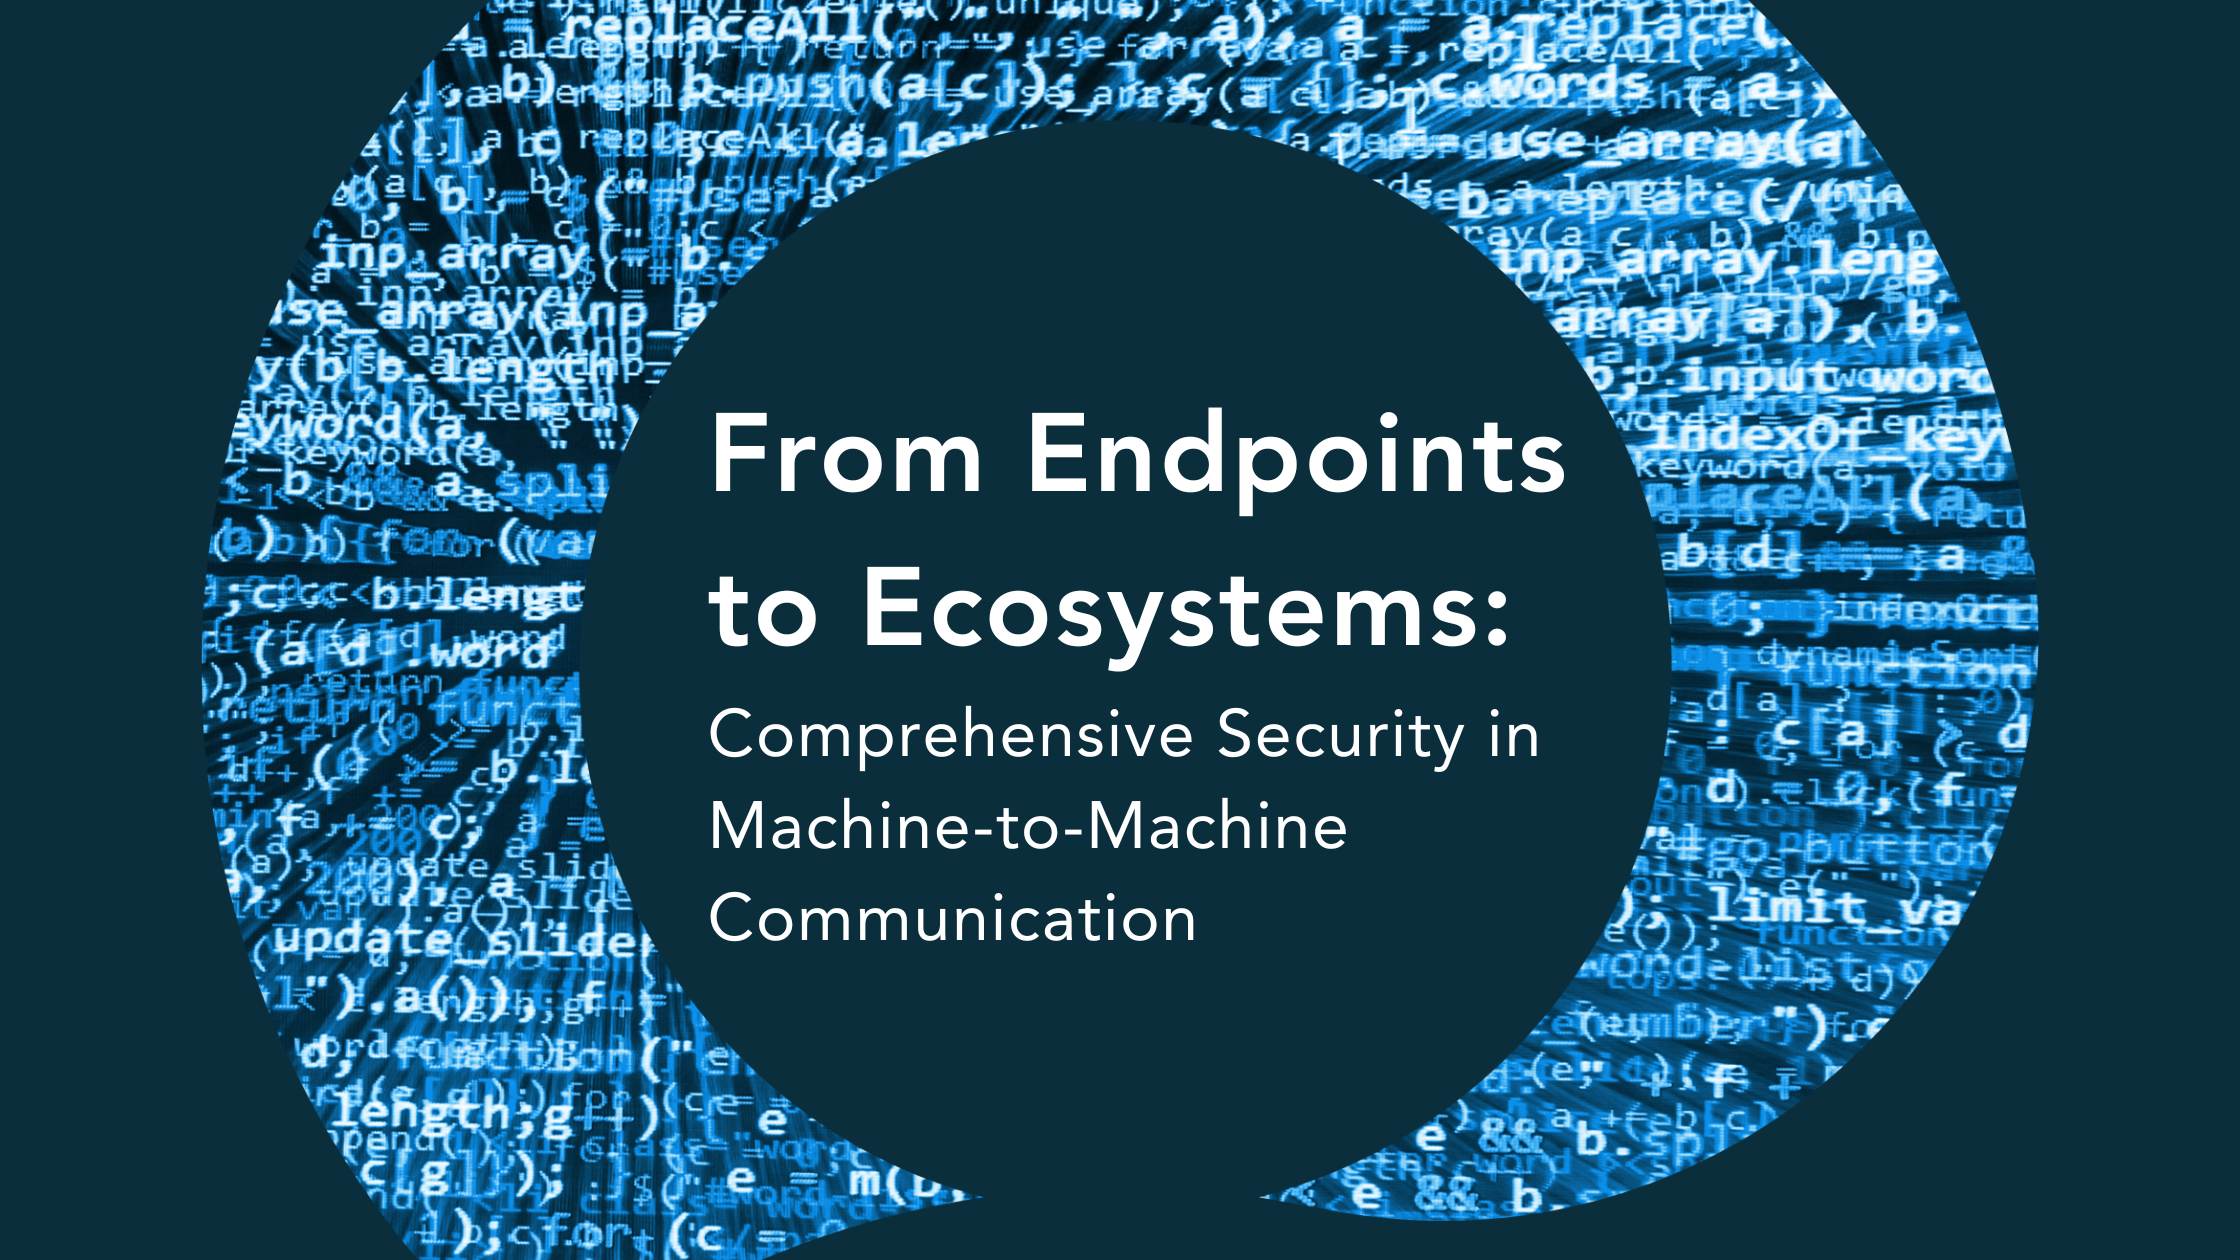 From Endpoints to Ecosystems: Comprehensive Security in Machine-to-Machine Communication